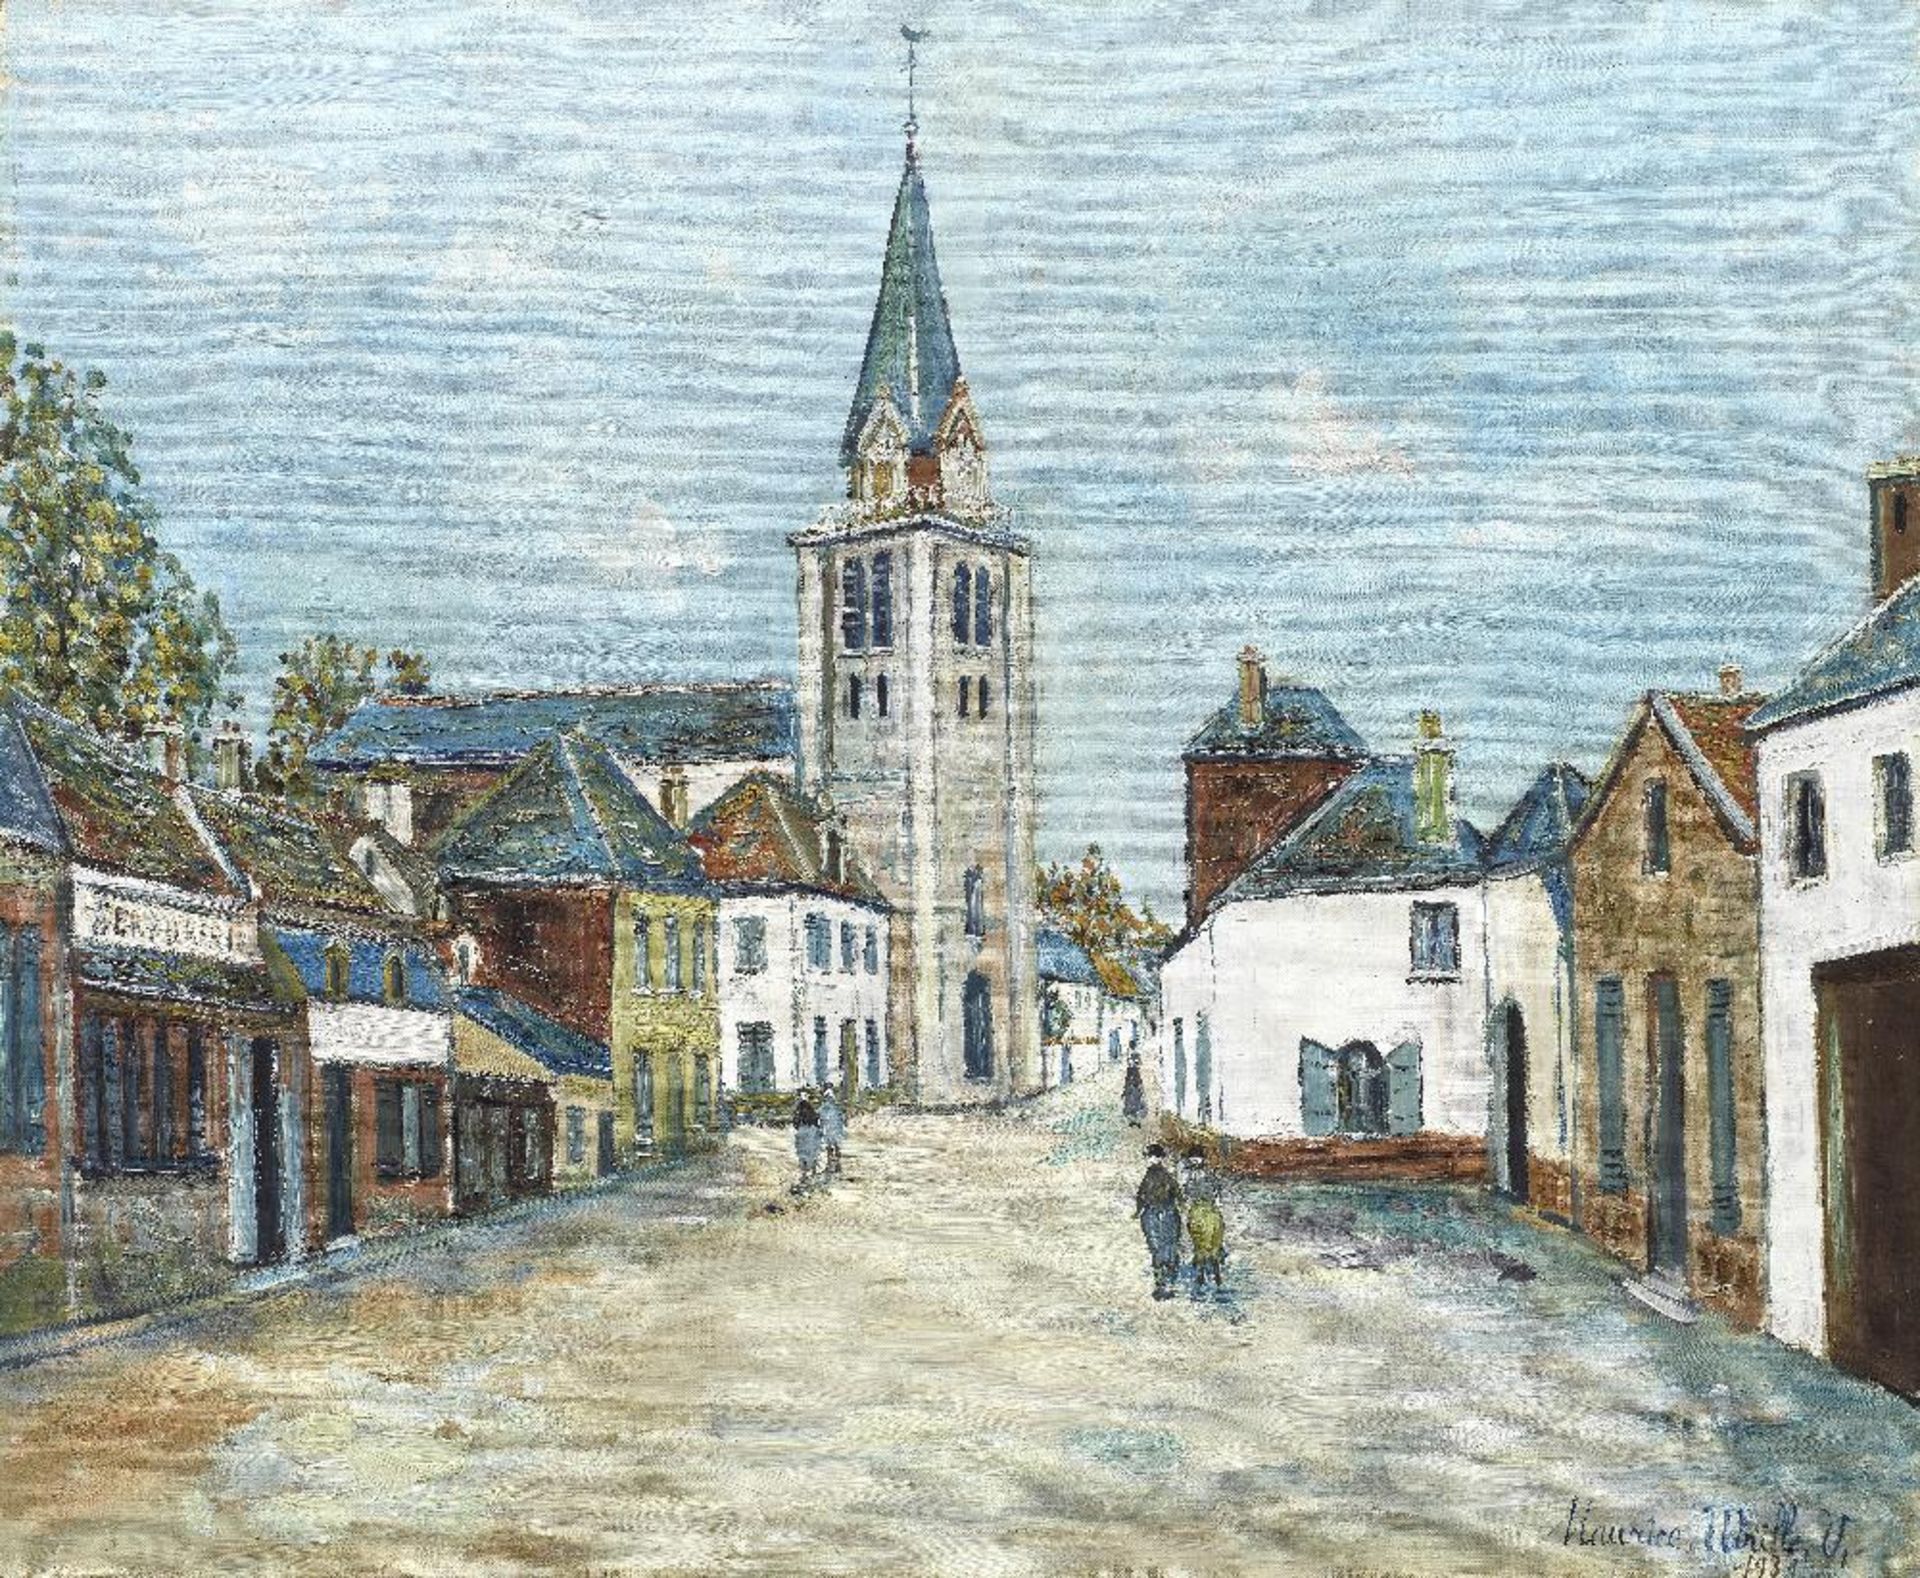 MAURICE UTRILLO (1883-1955) Rue de l'&#233;glise, Bucquoy (Painted in Bucquoy in 1931)